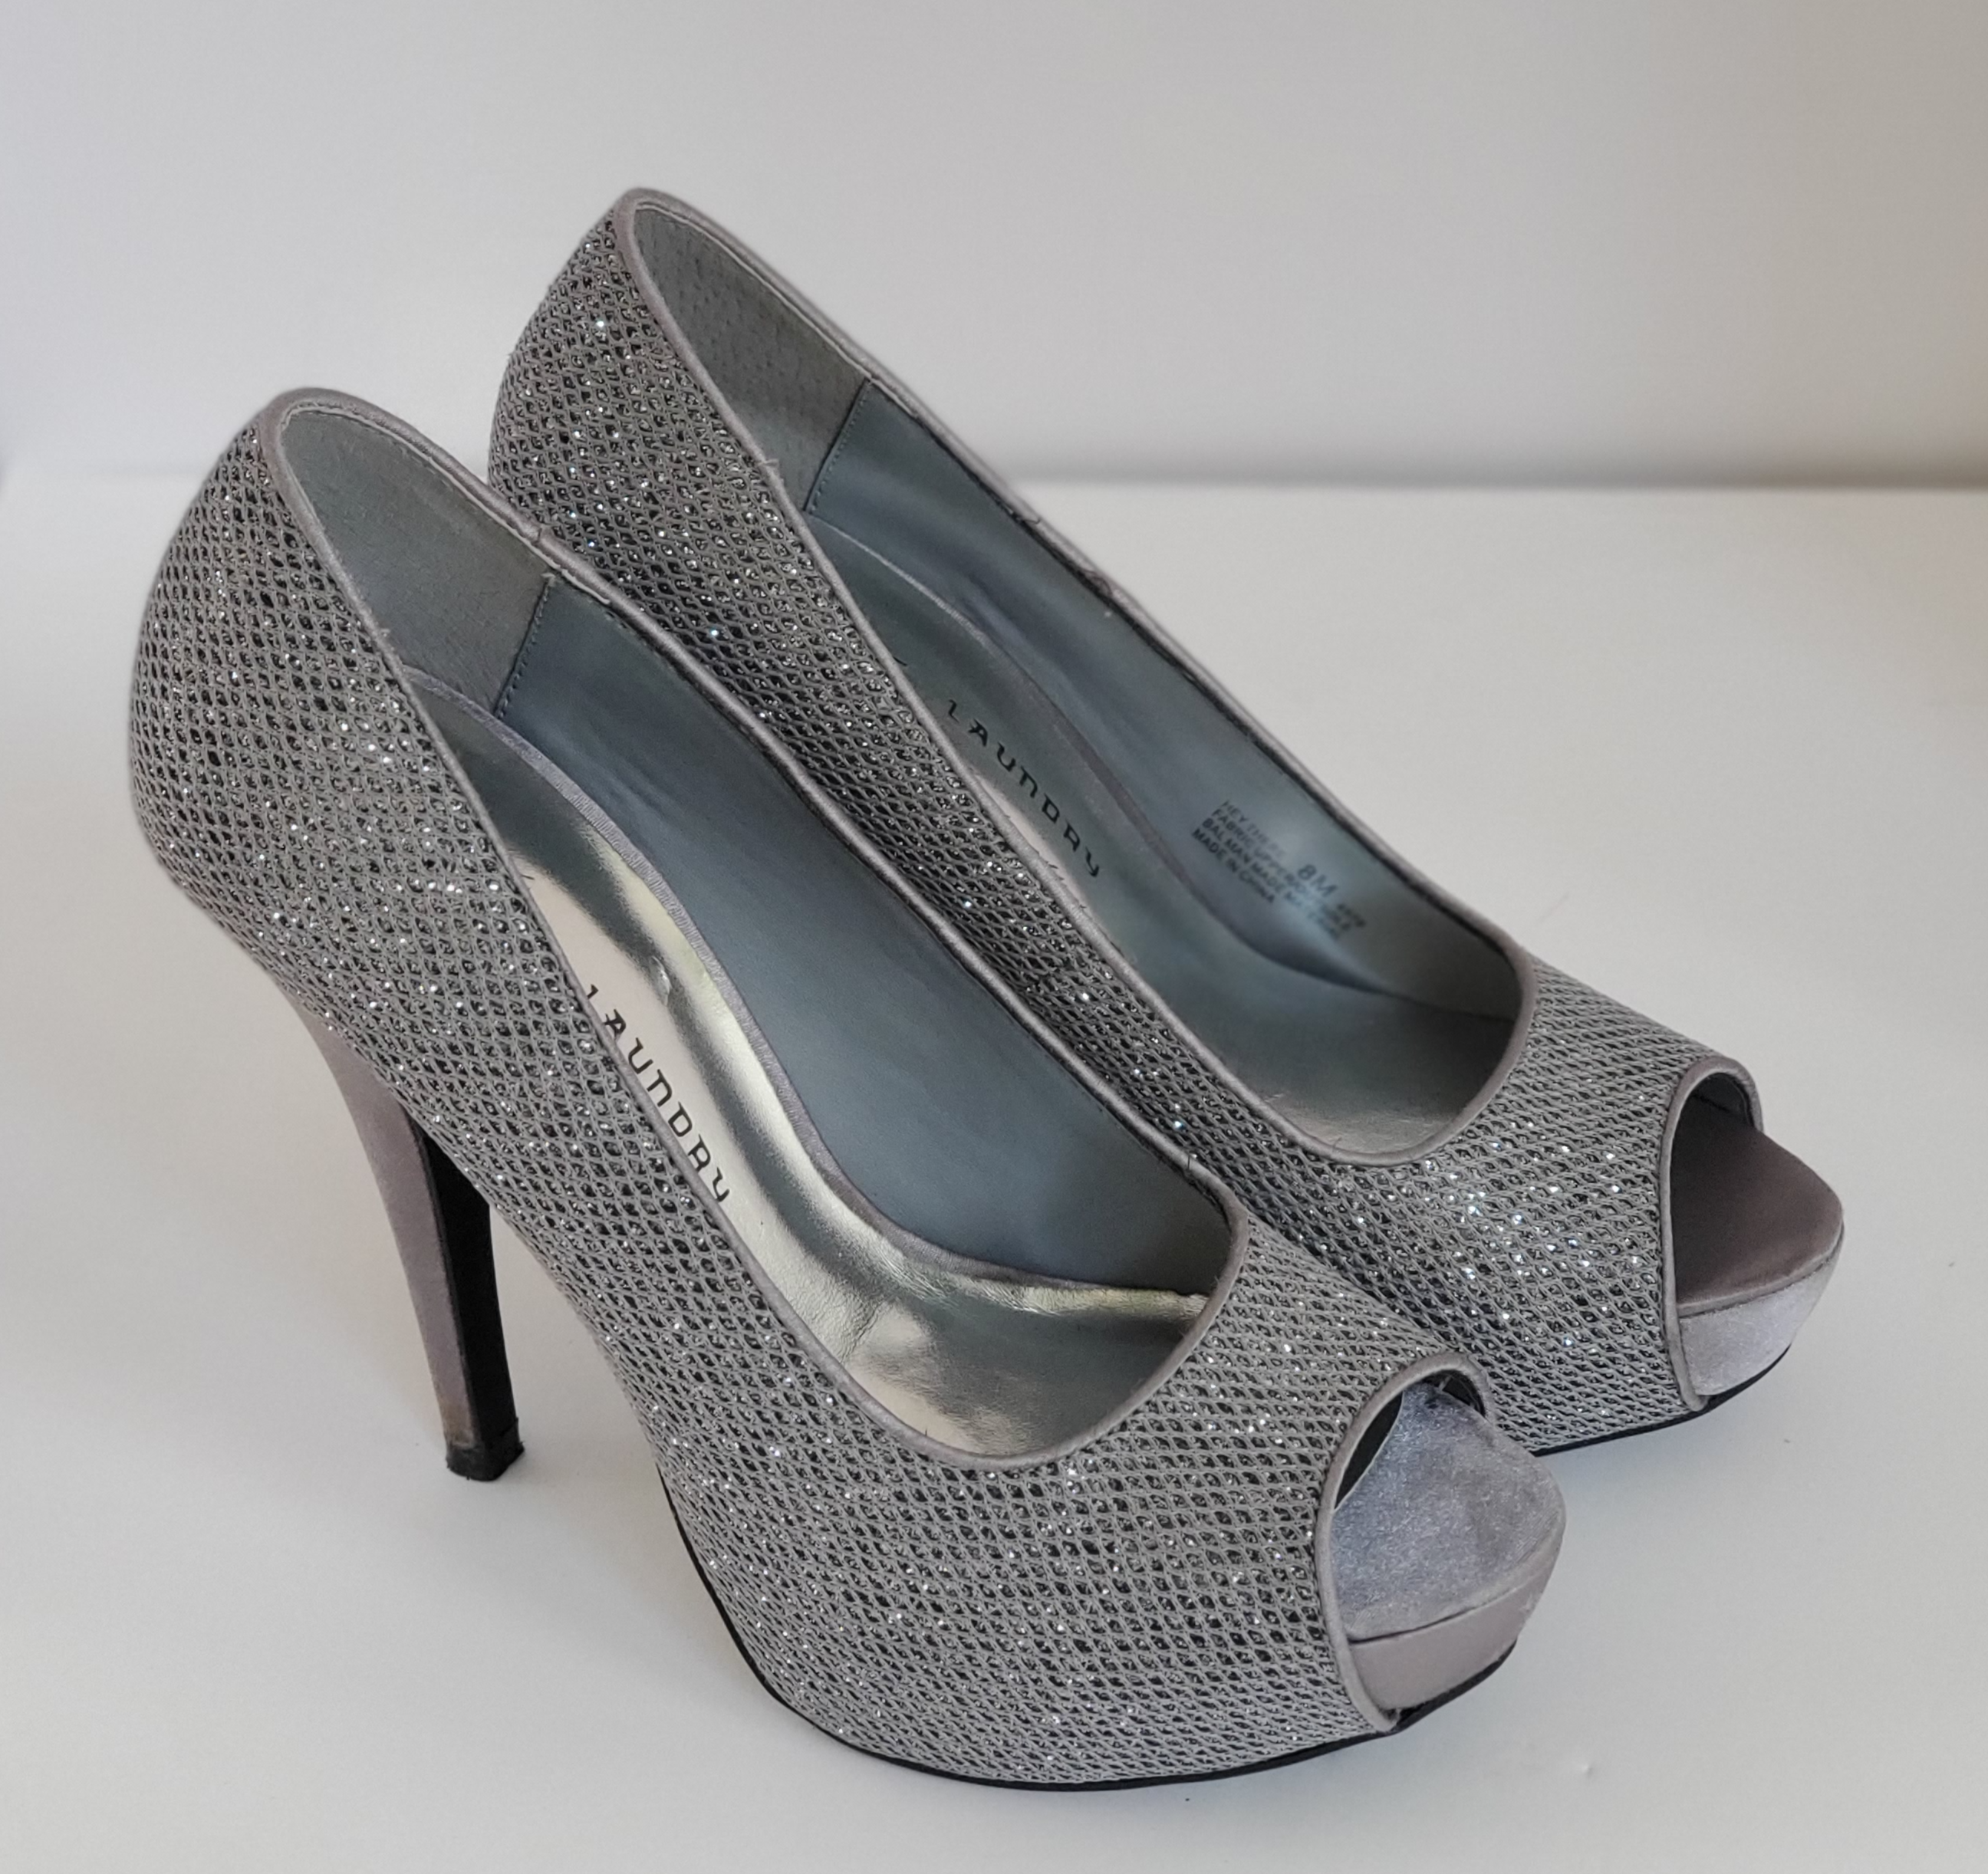 Grey And Black Footgasm 3 inches pencil heels at Rs 350/pair in New Delhi |  ID: 27525256633